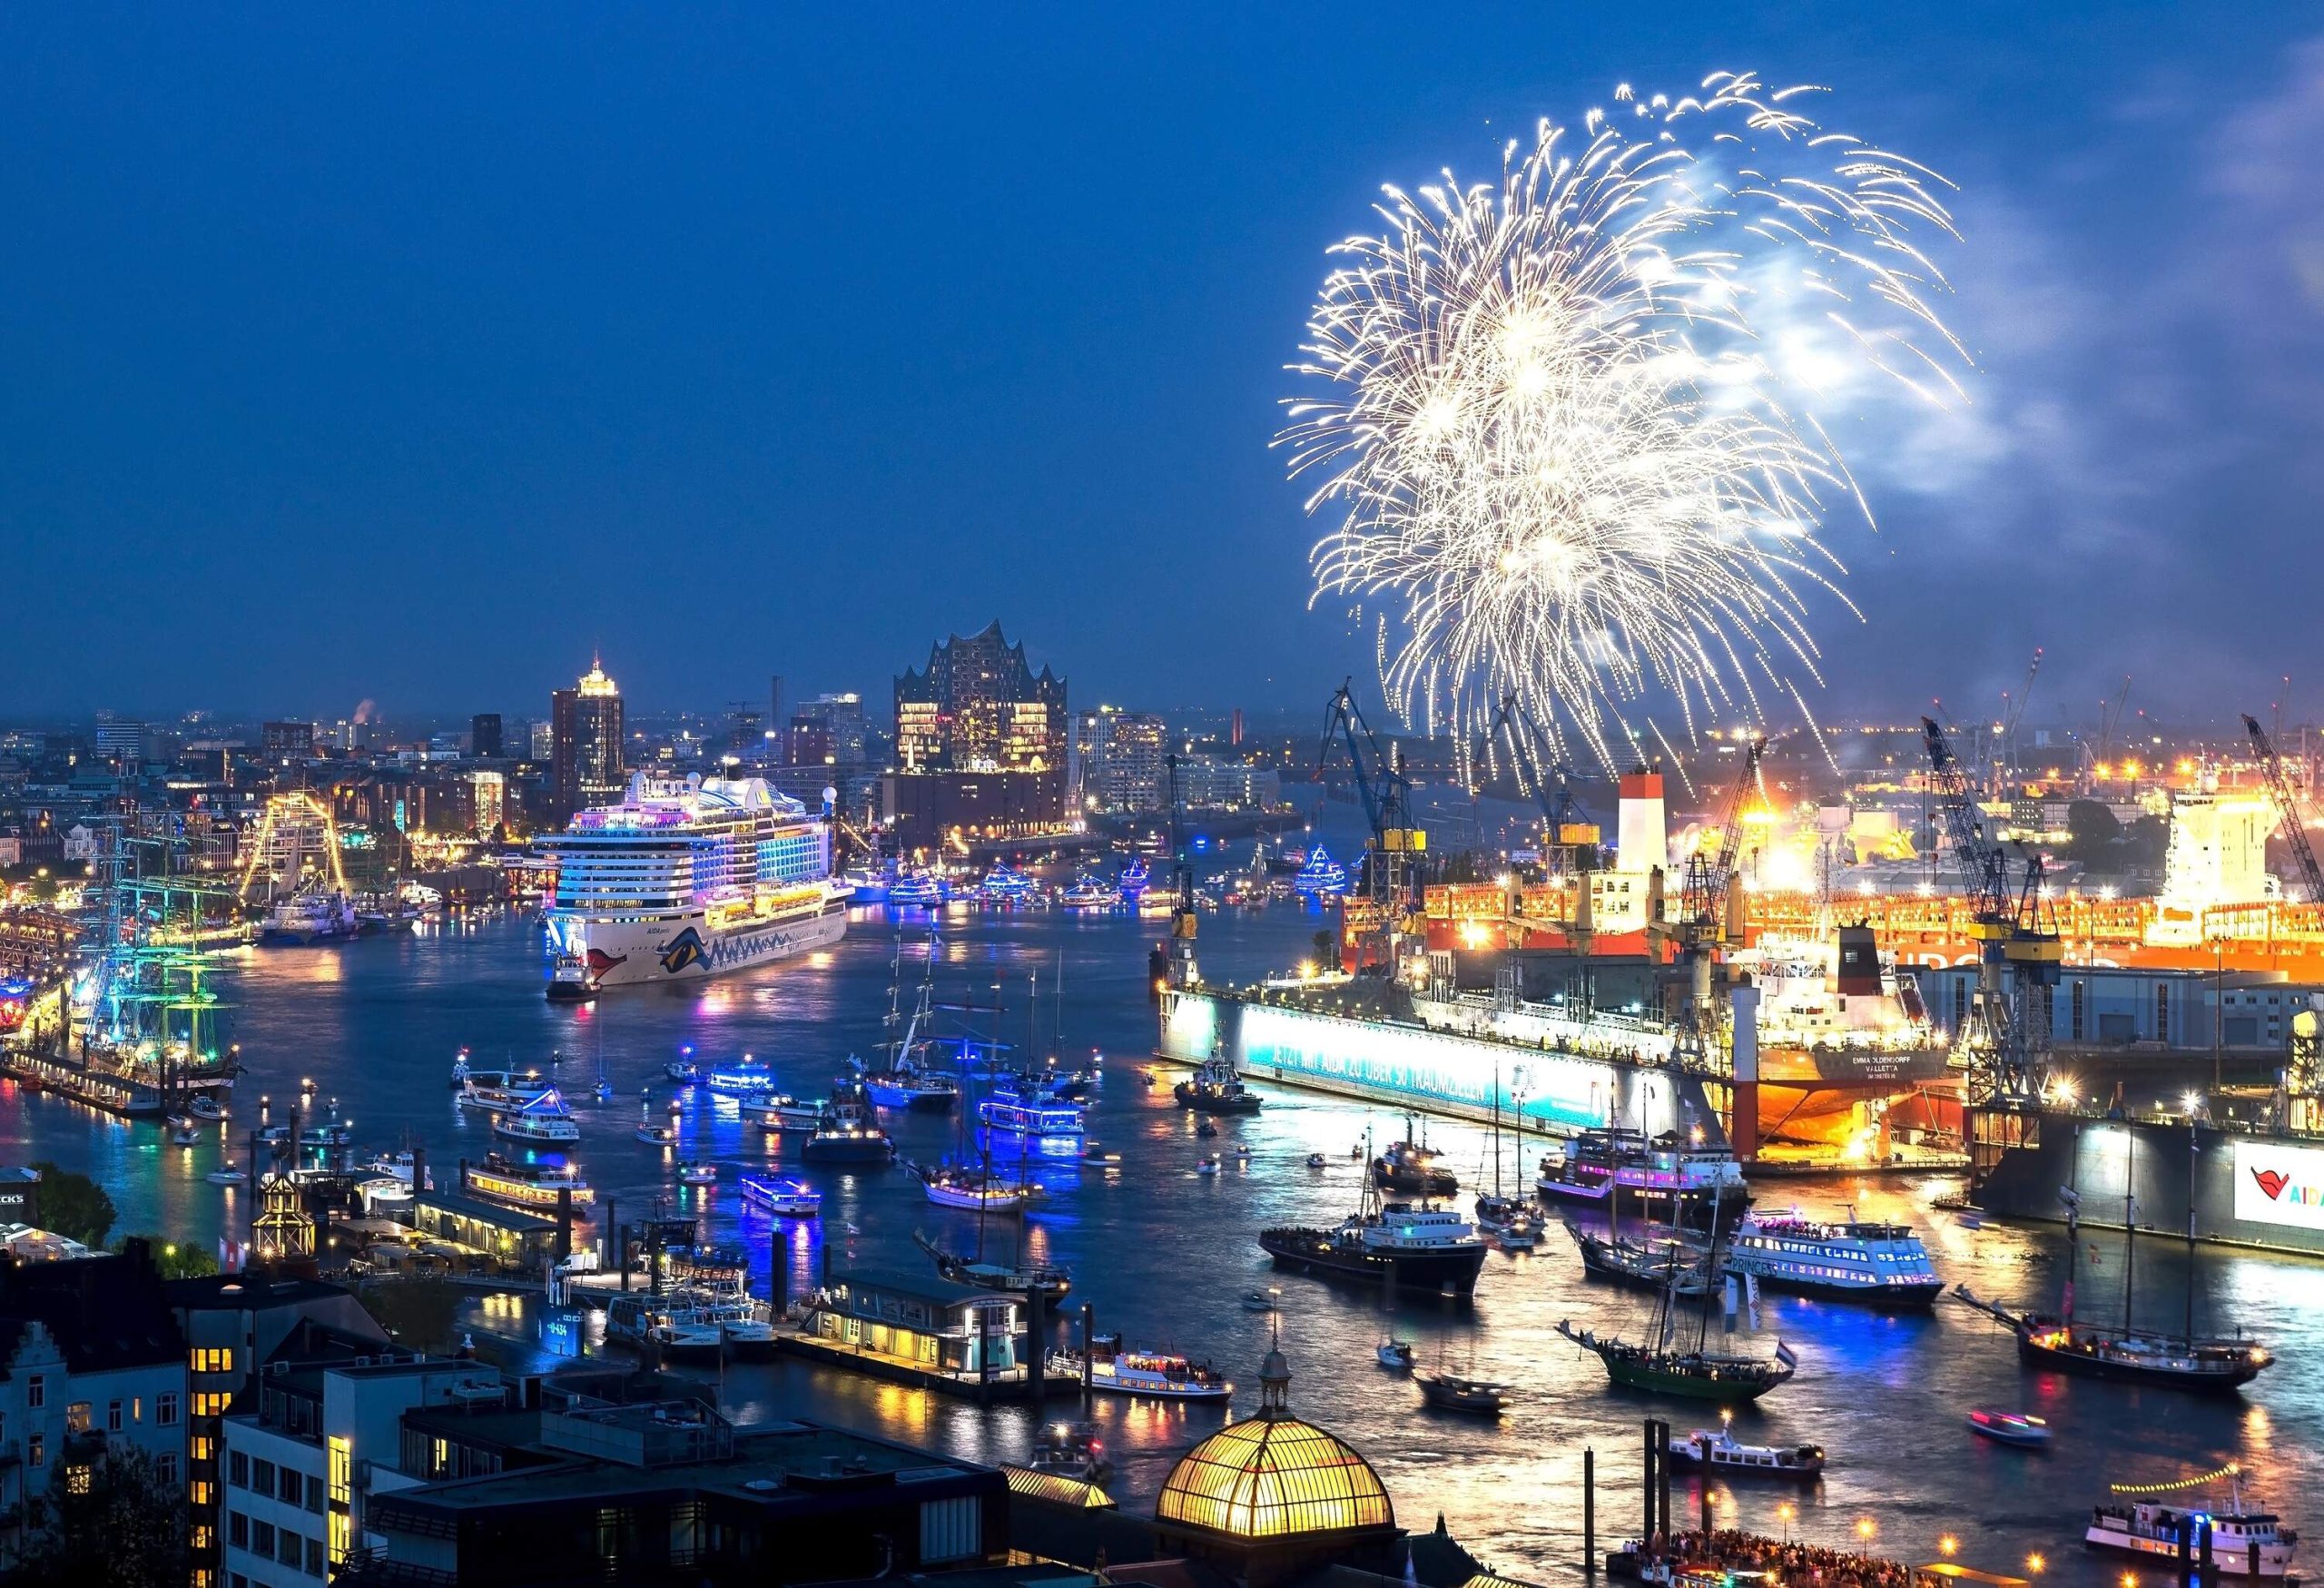 Under the cover of night, the city's bustling harbour is illuminated by a colourful fireworks display.